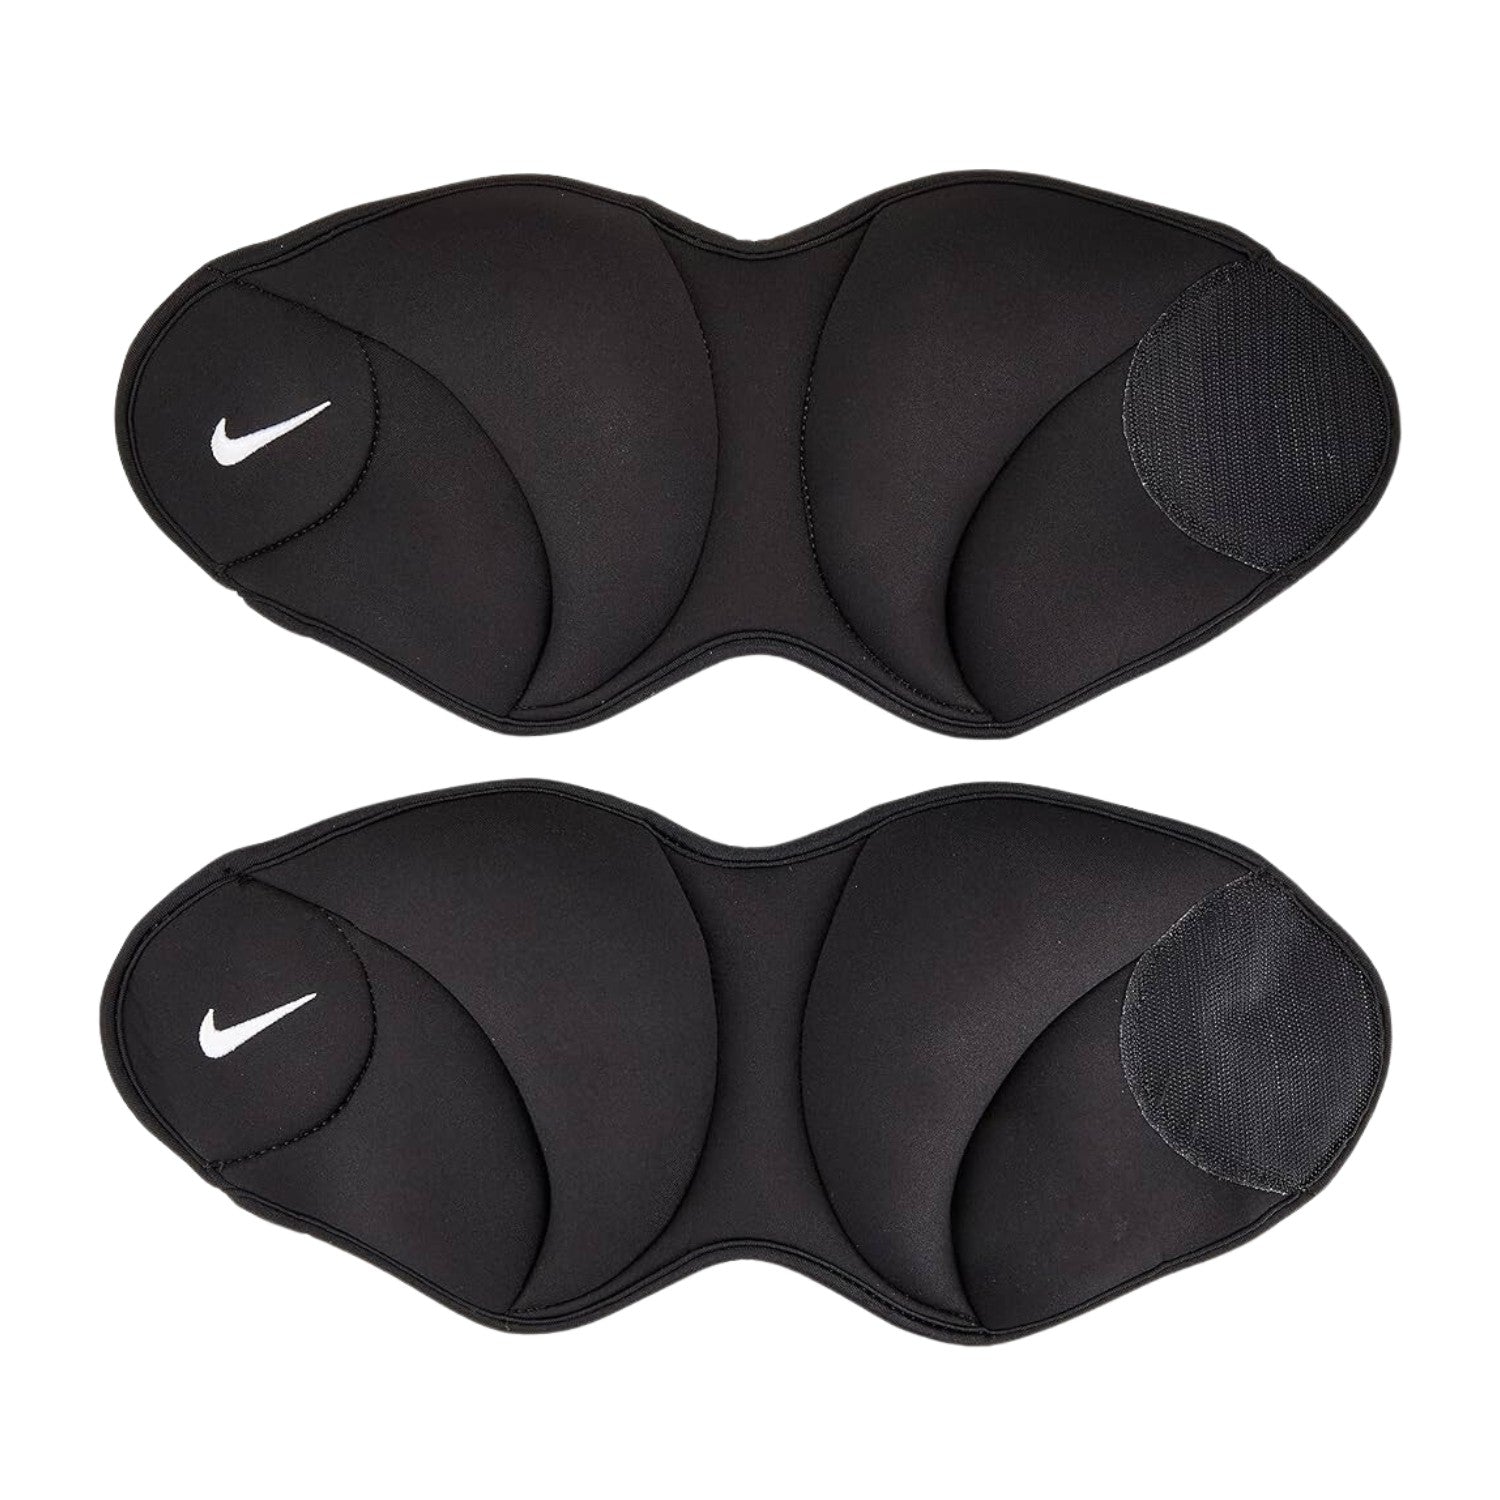 Nike Ankle Weights 5 Lb 2 Pack Unisex Style : N1000815